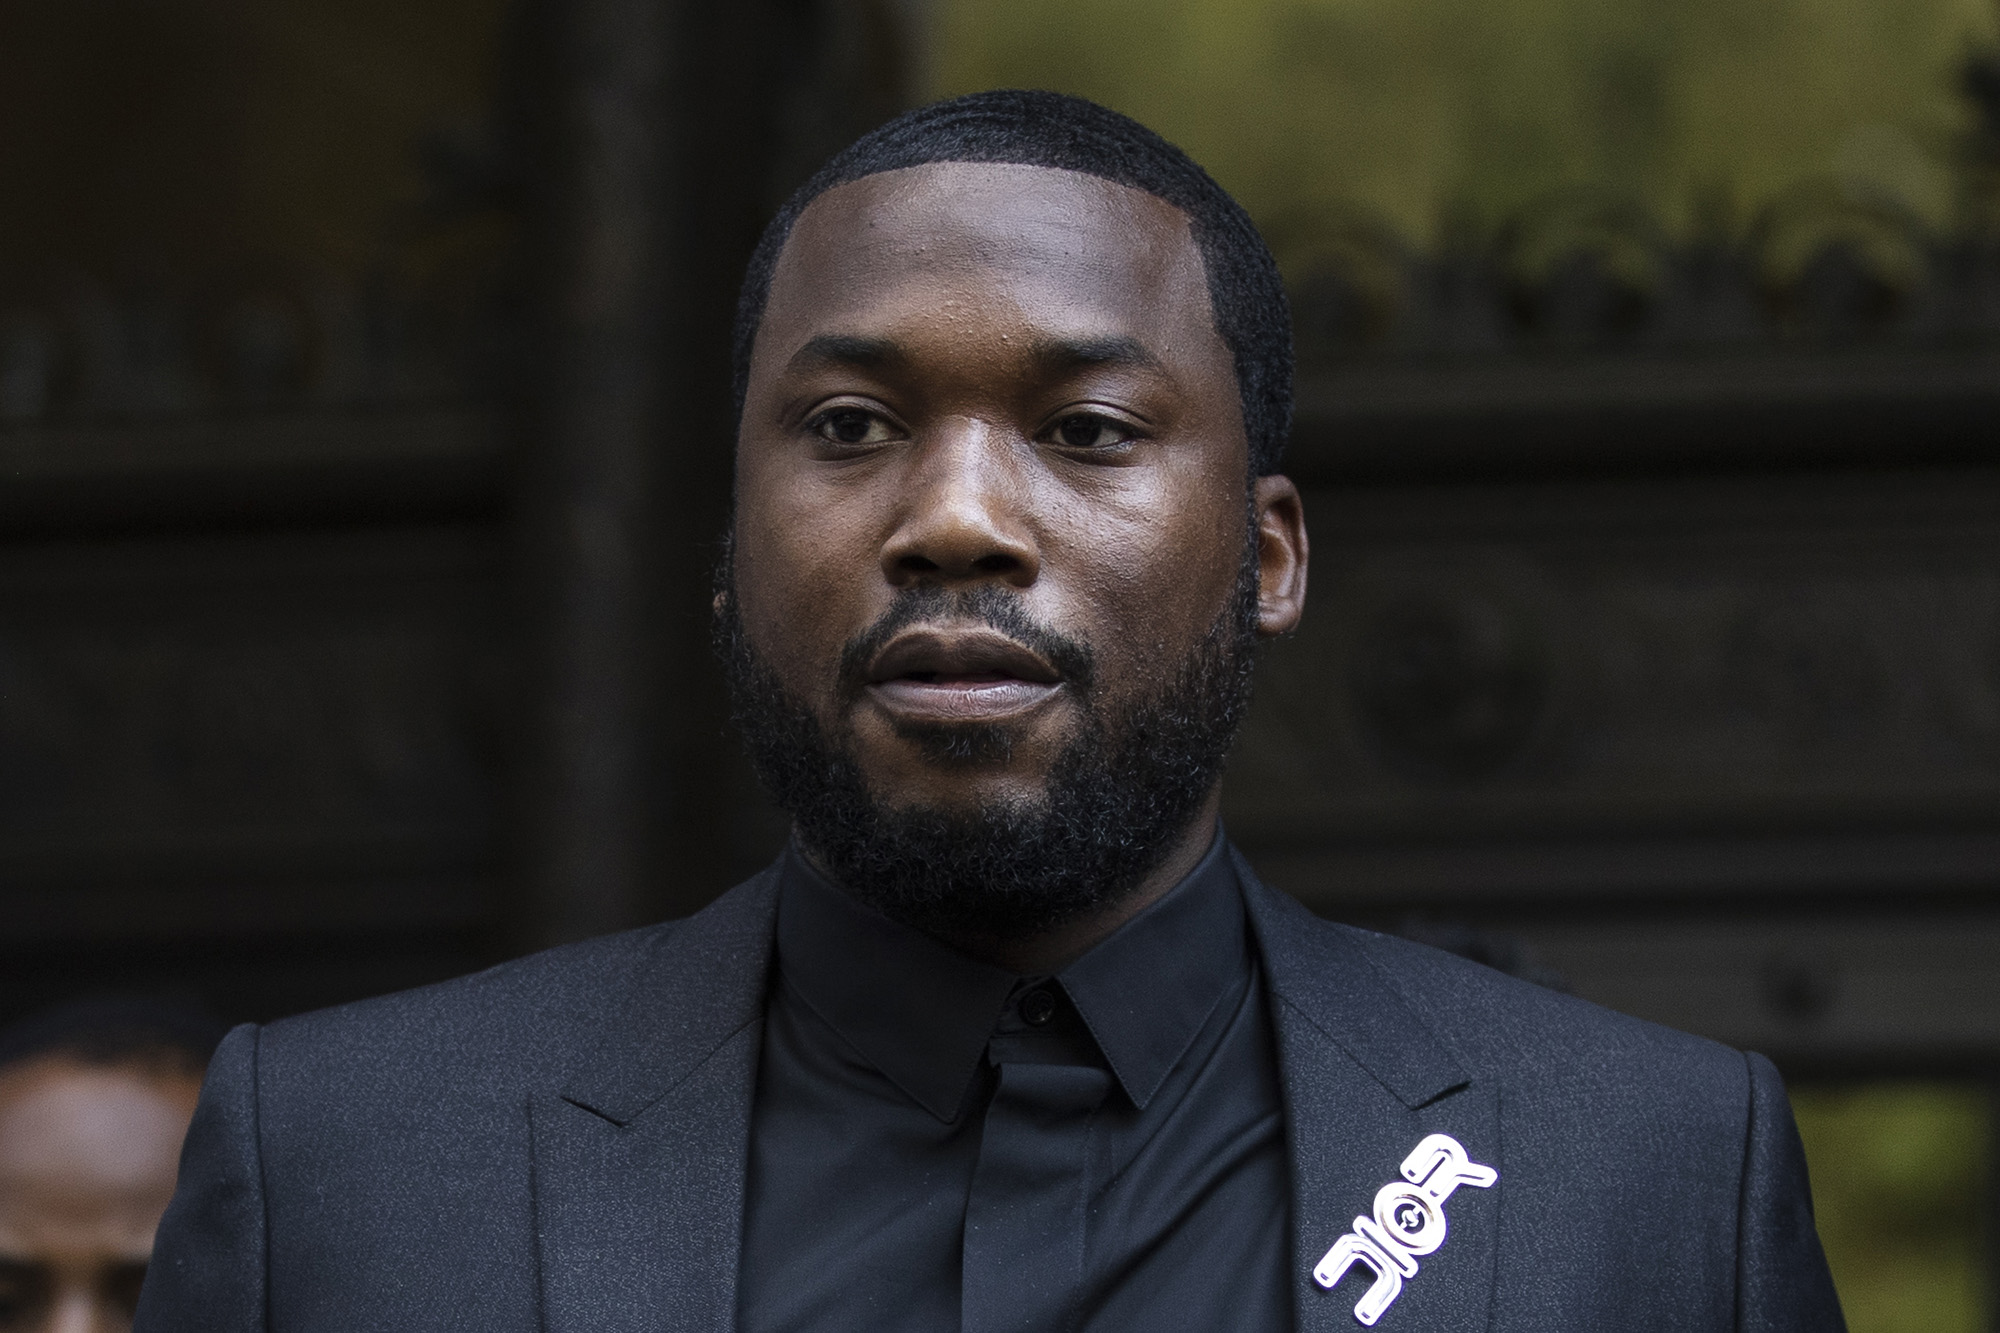 Meek Mill's 2008 conviction tossed, prosecutors may now drop case